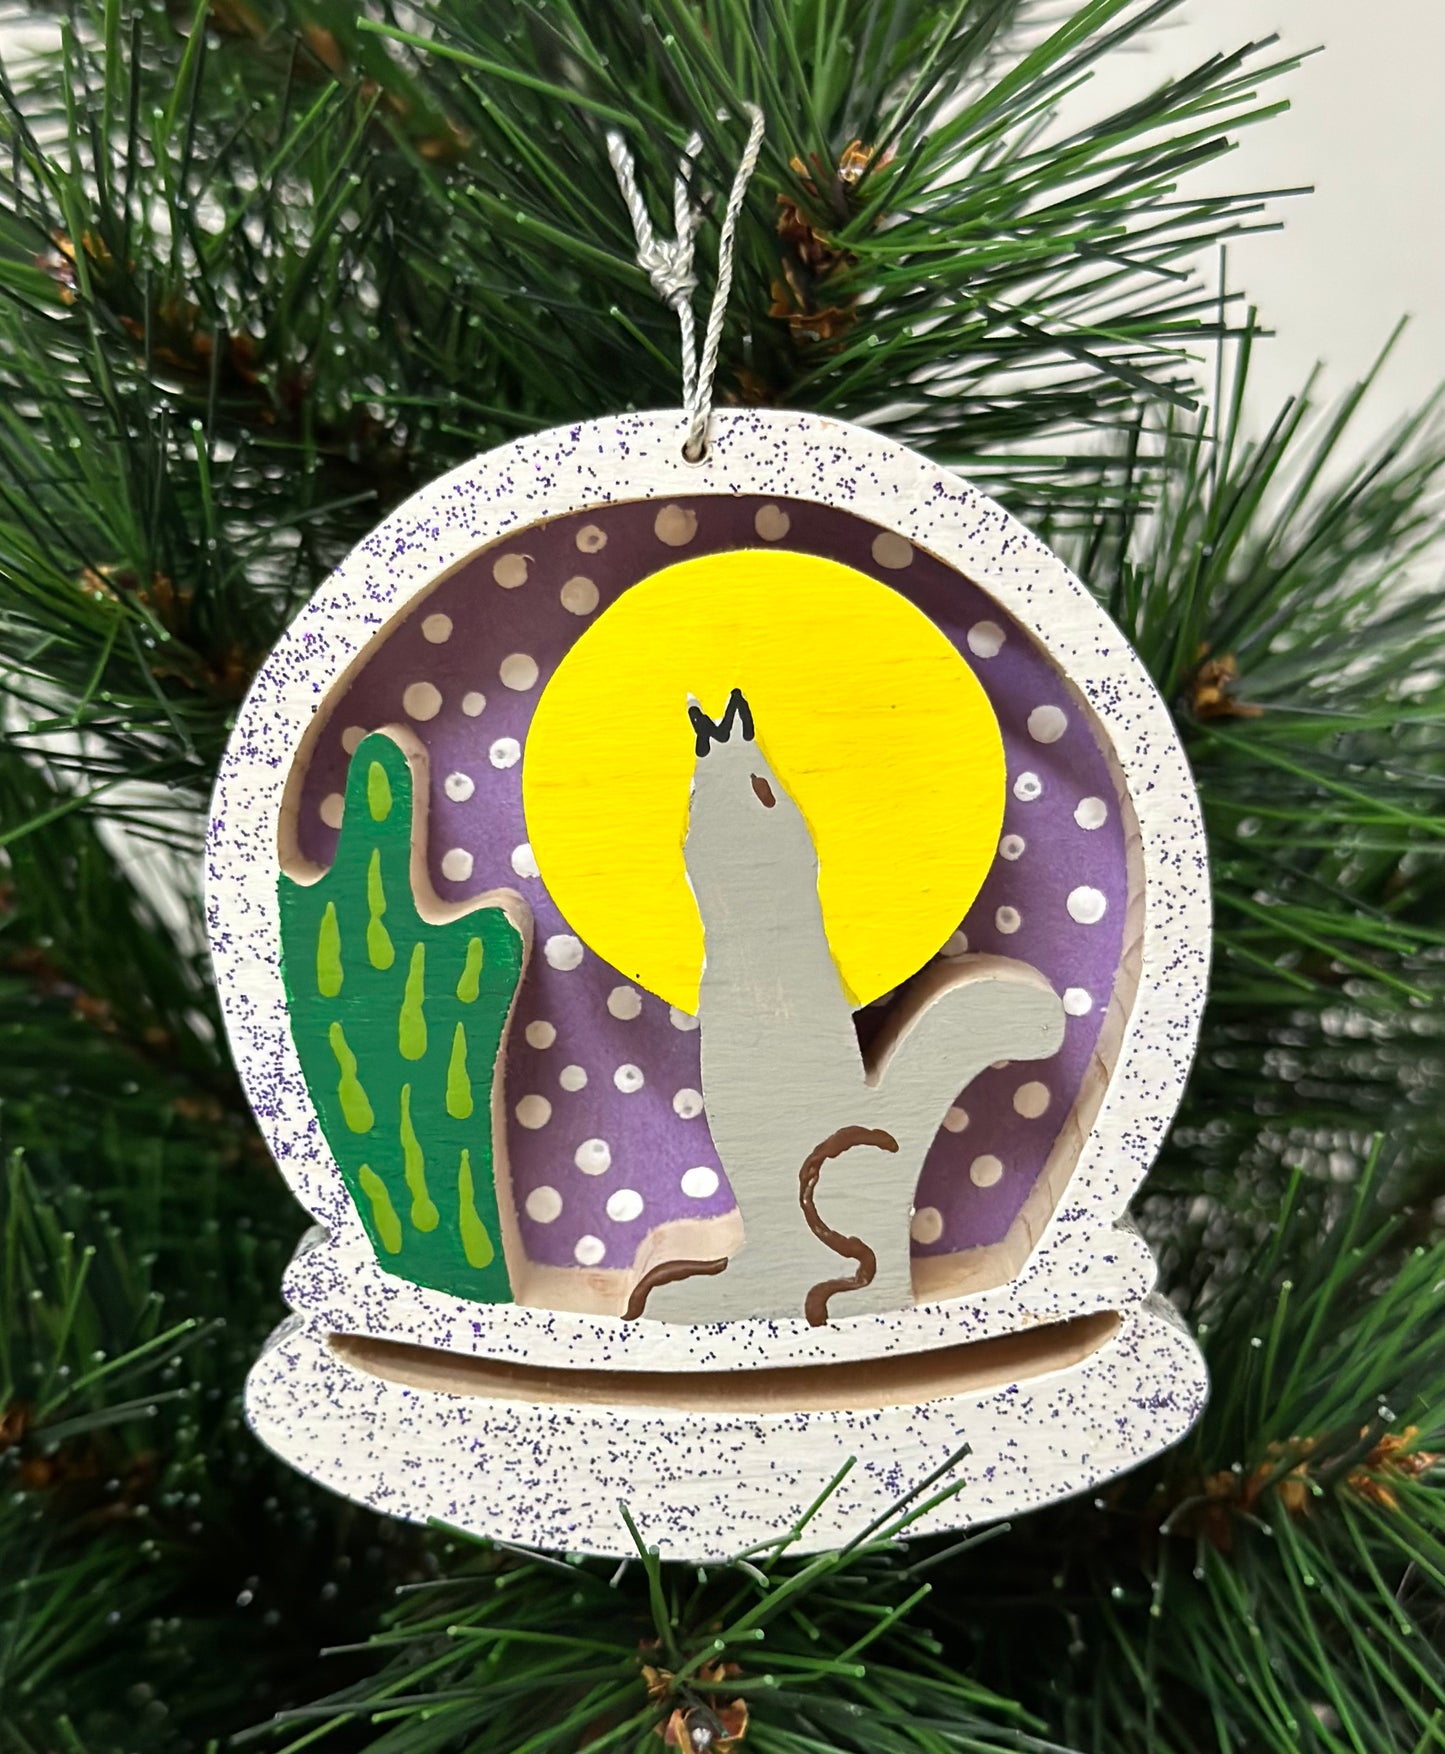 Coyote Snow Globe Wooden Ornament Handcrafted